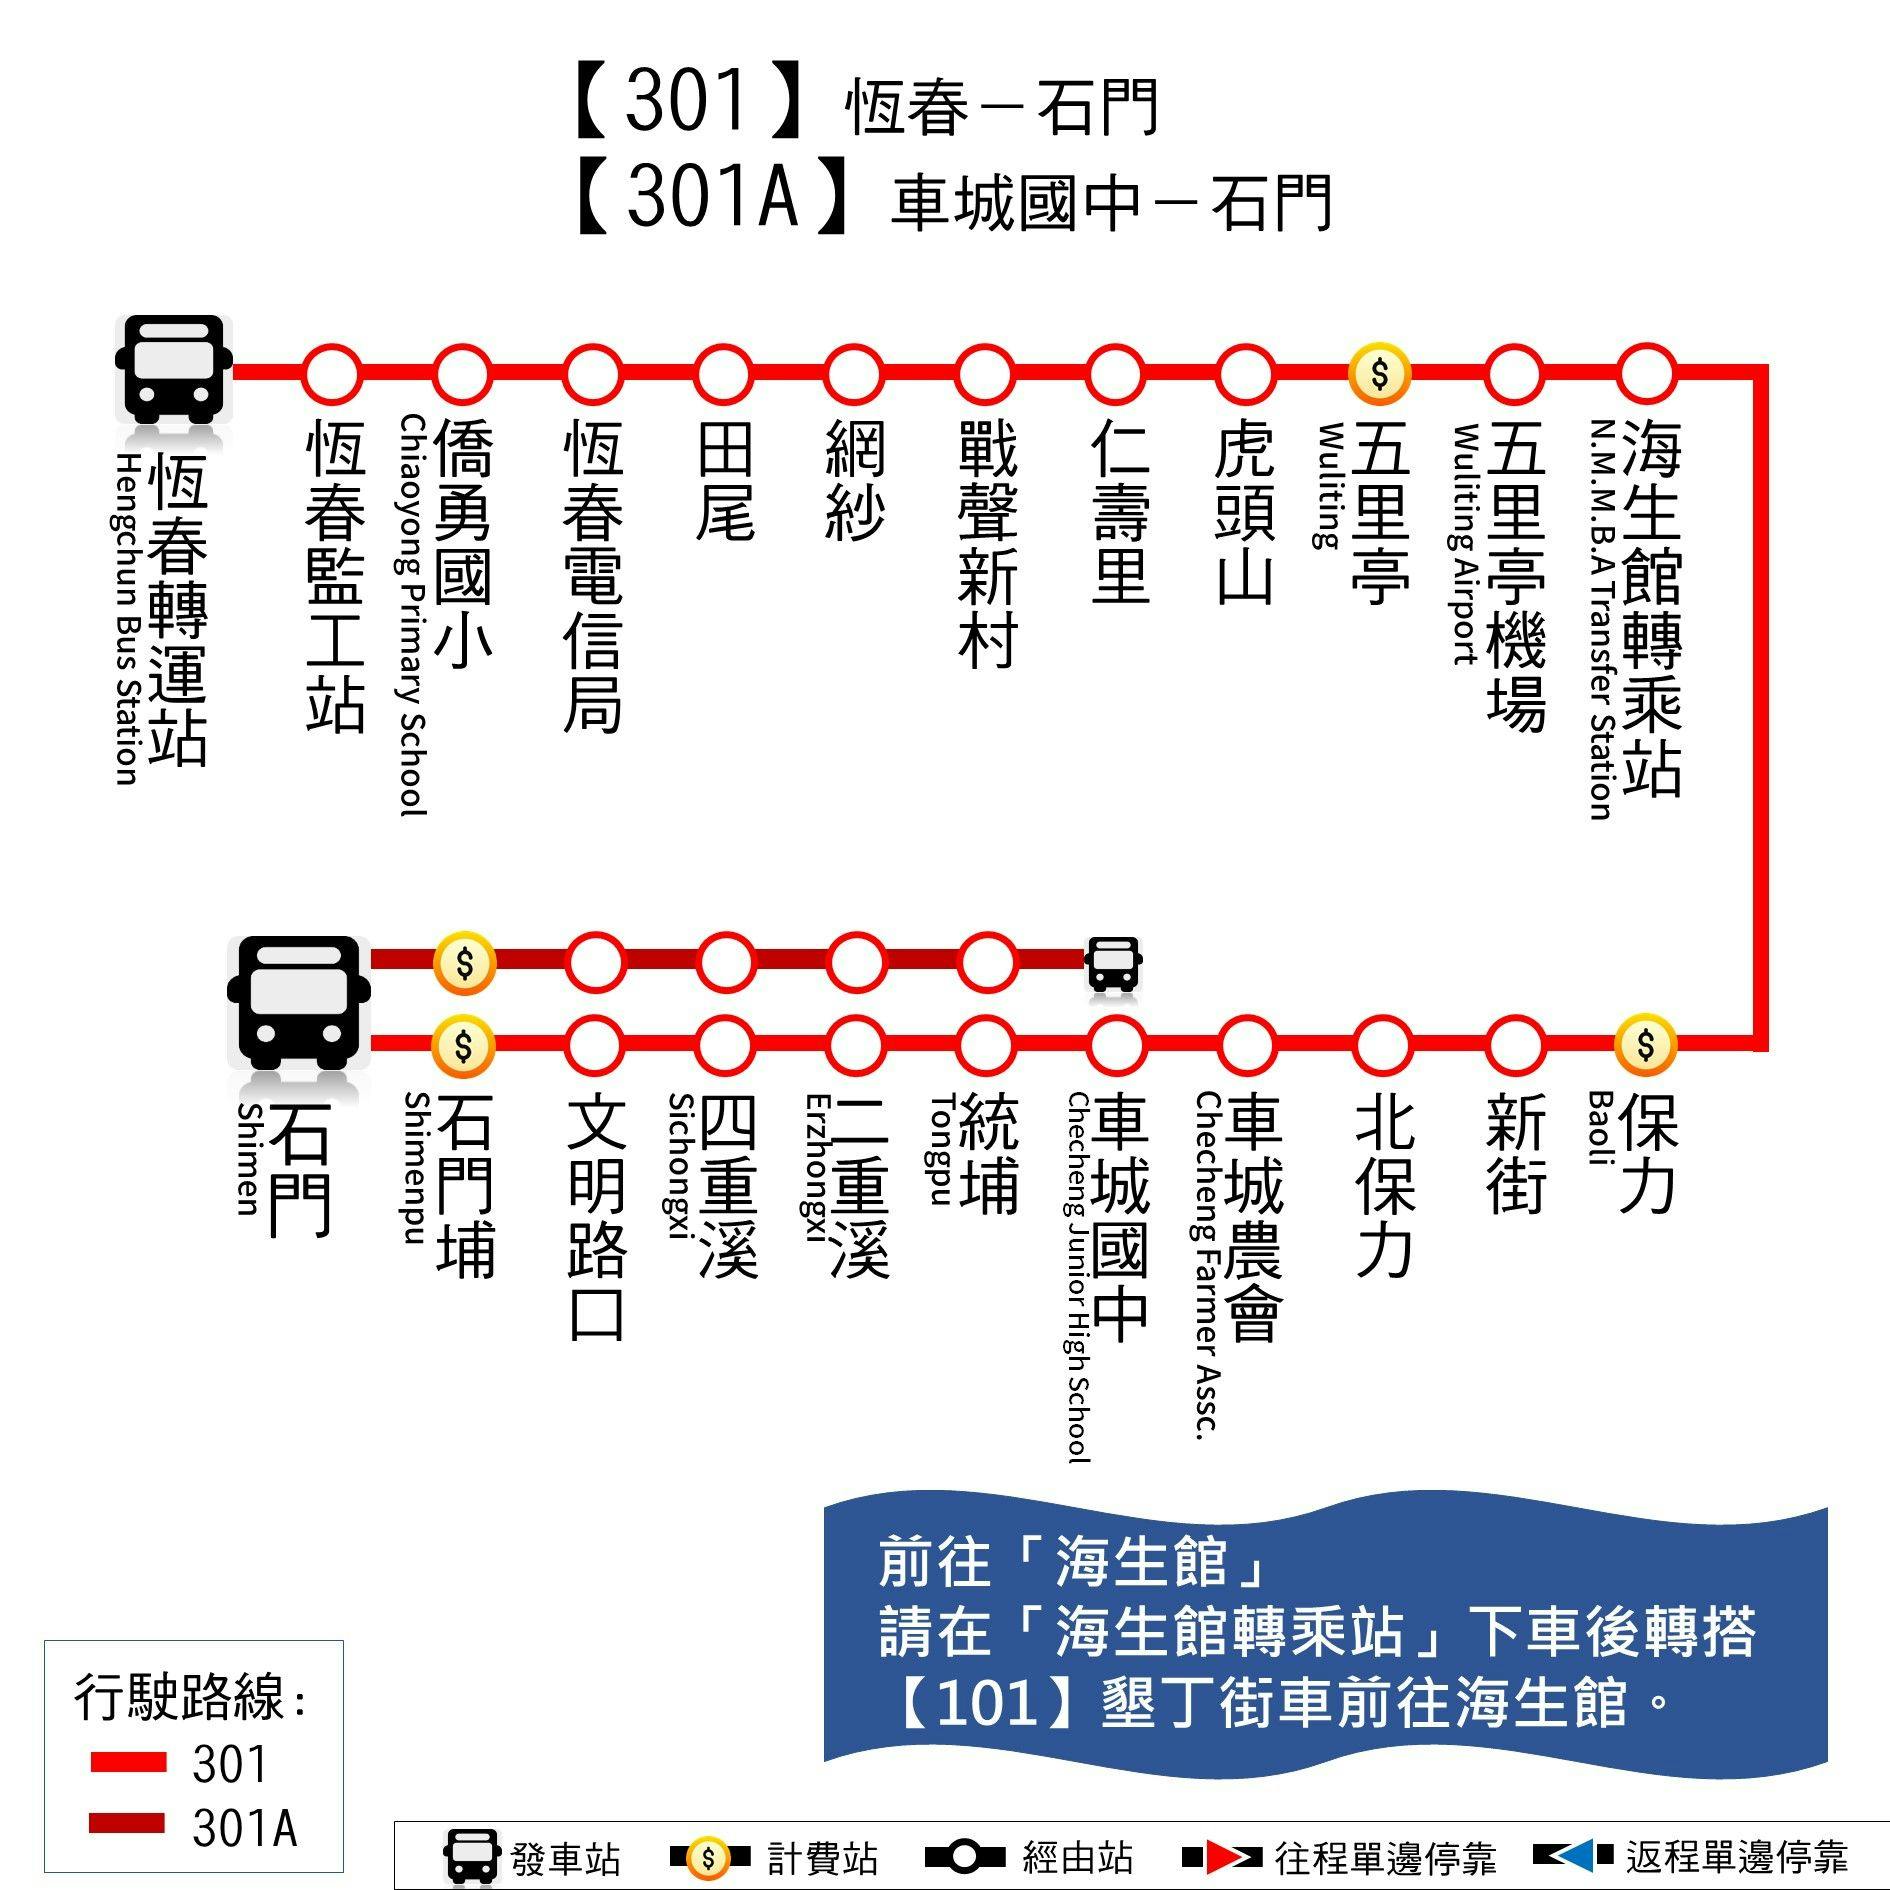 301Route Map-屏東 Bus